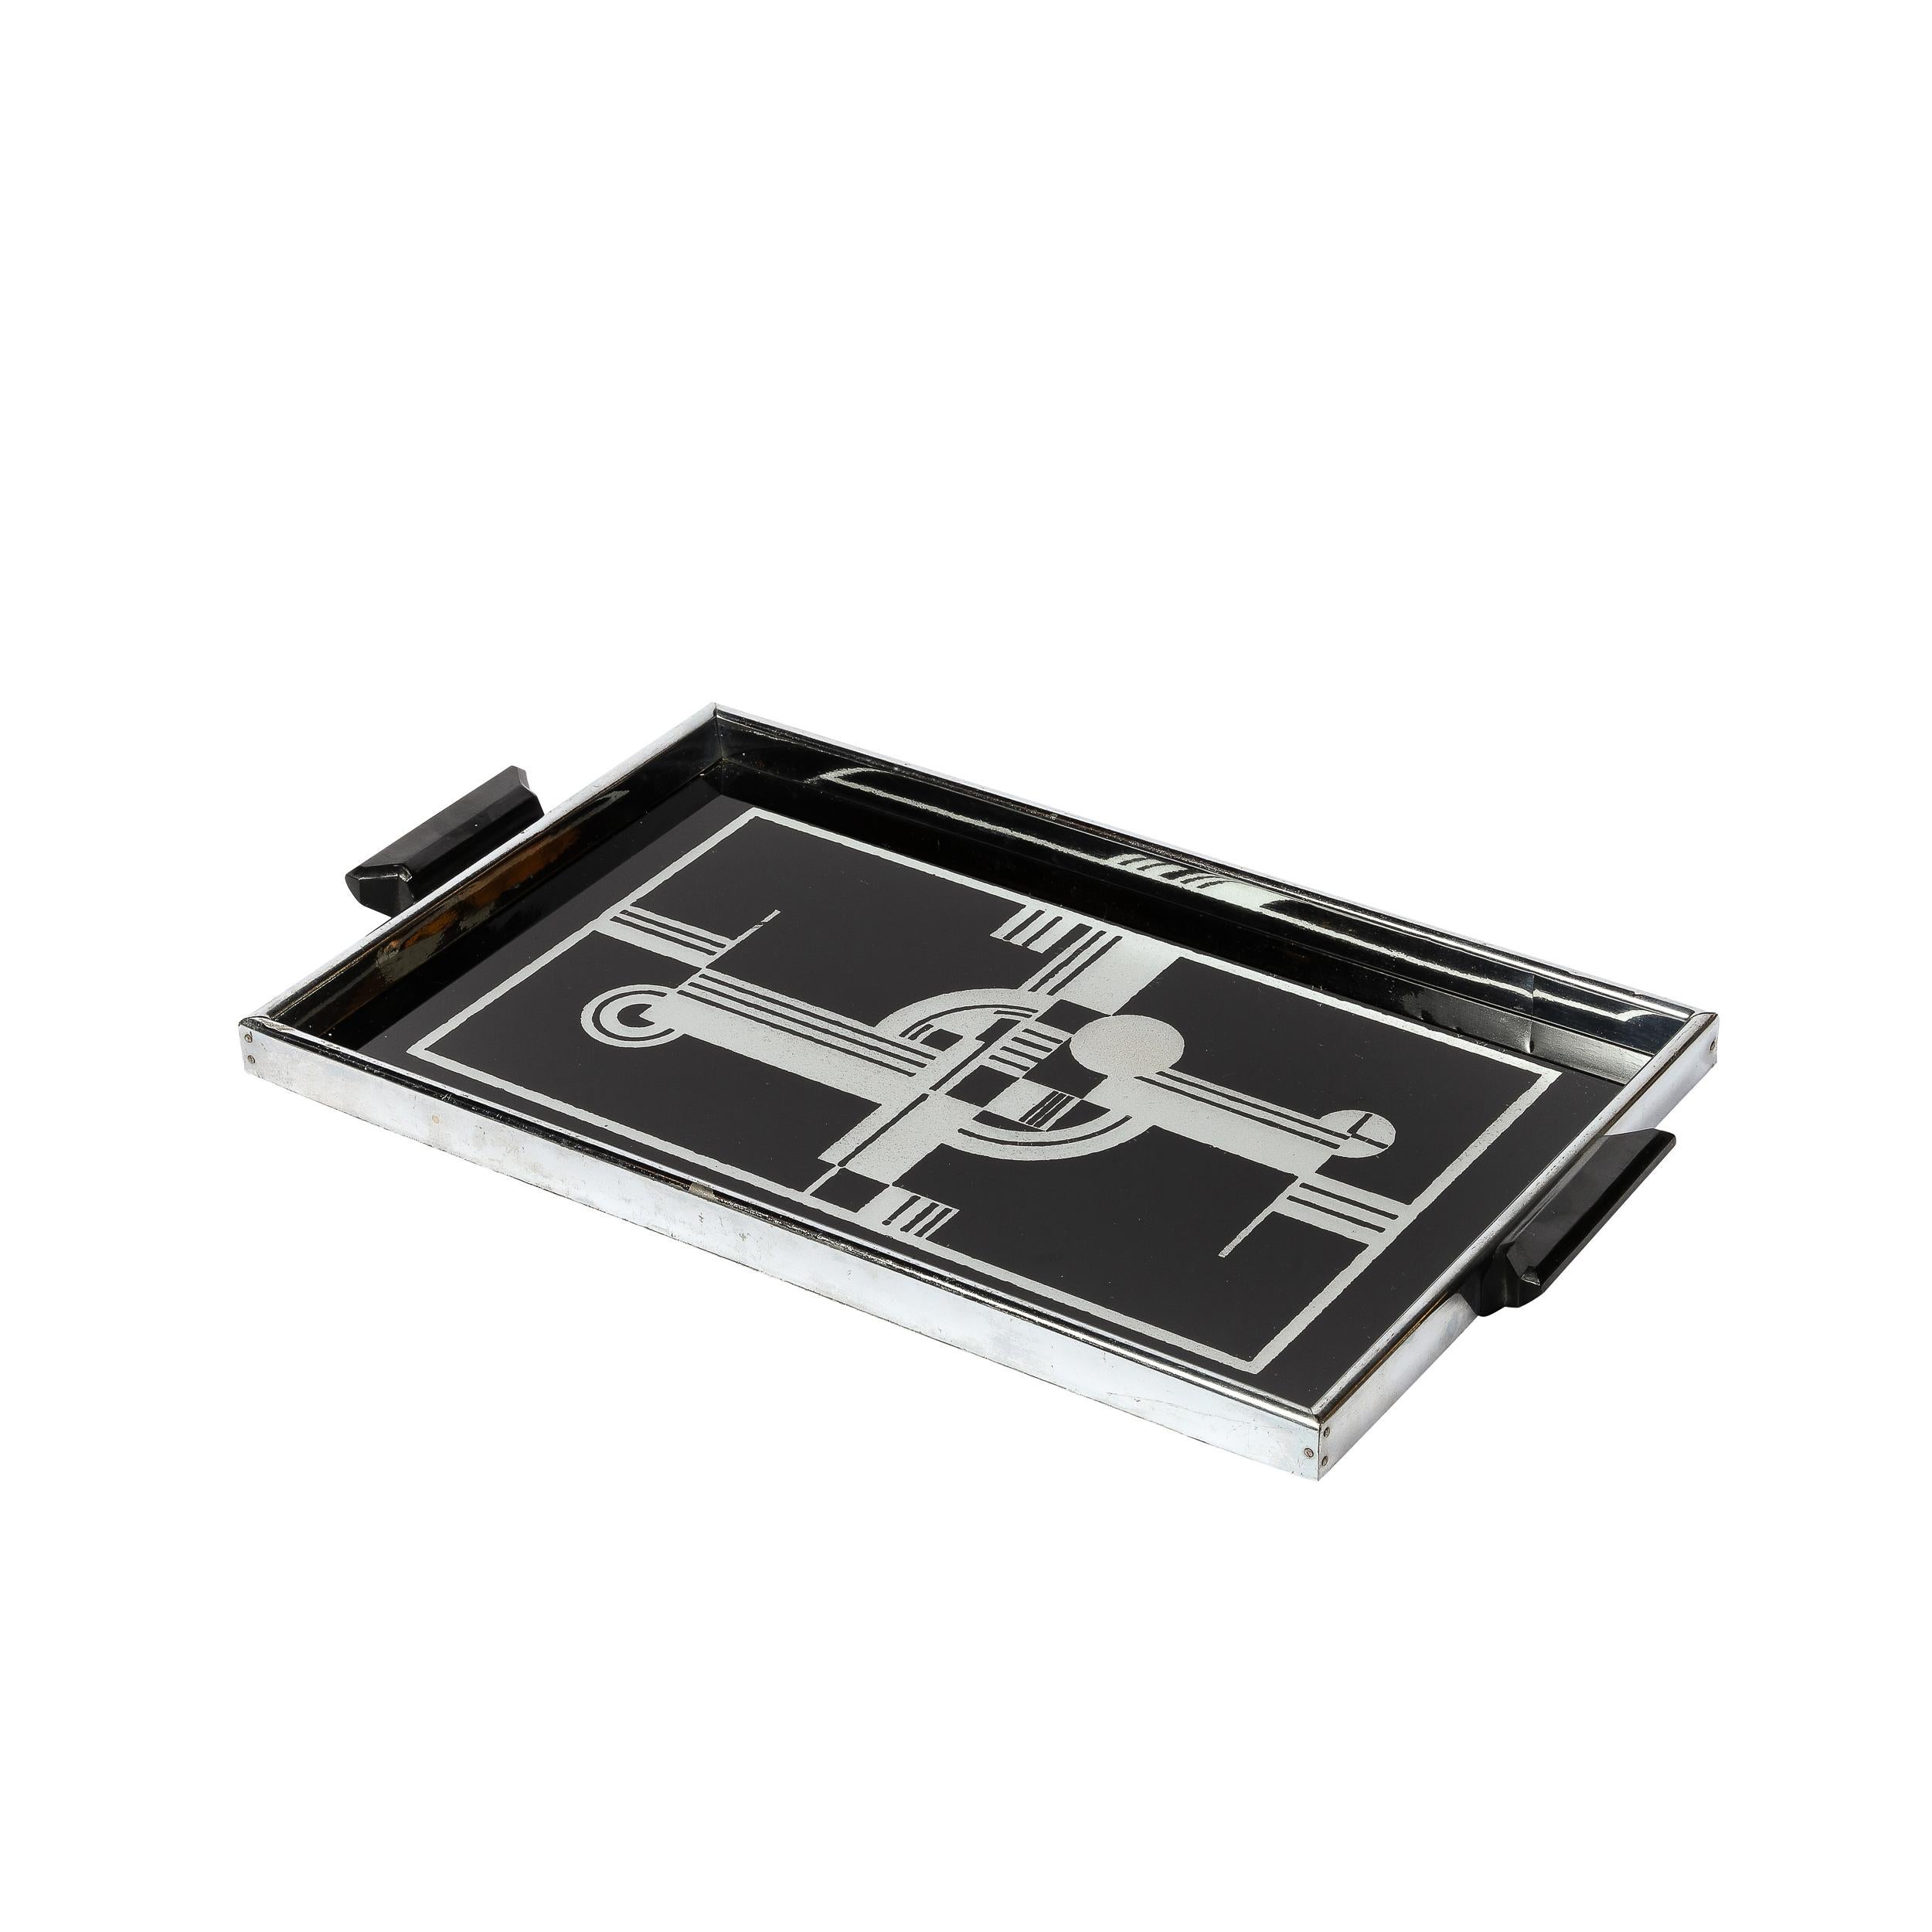 This beautiful Art Deco Serving Tray originates from the United States, Circa 1935. Beautifully composed in black and white geometric forms, this is a highly desirable and collectible piece. Lined in Polished chrome with handles composed of Black